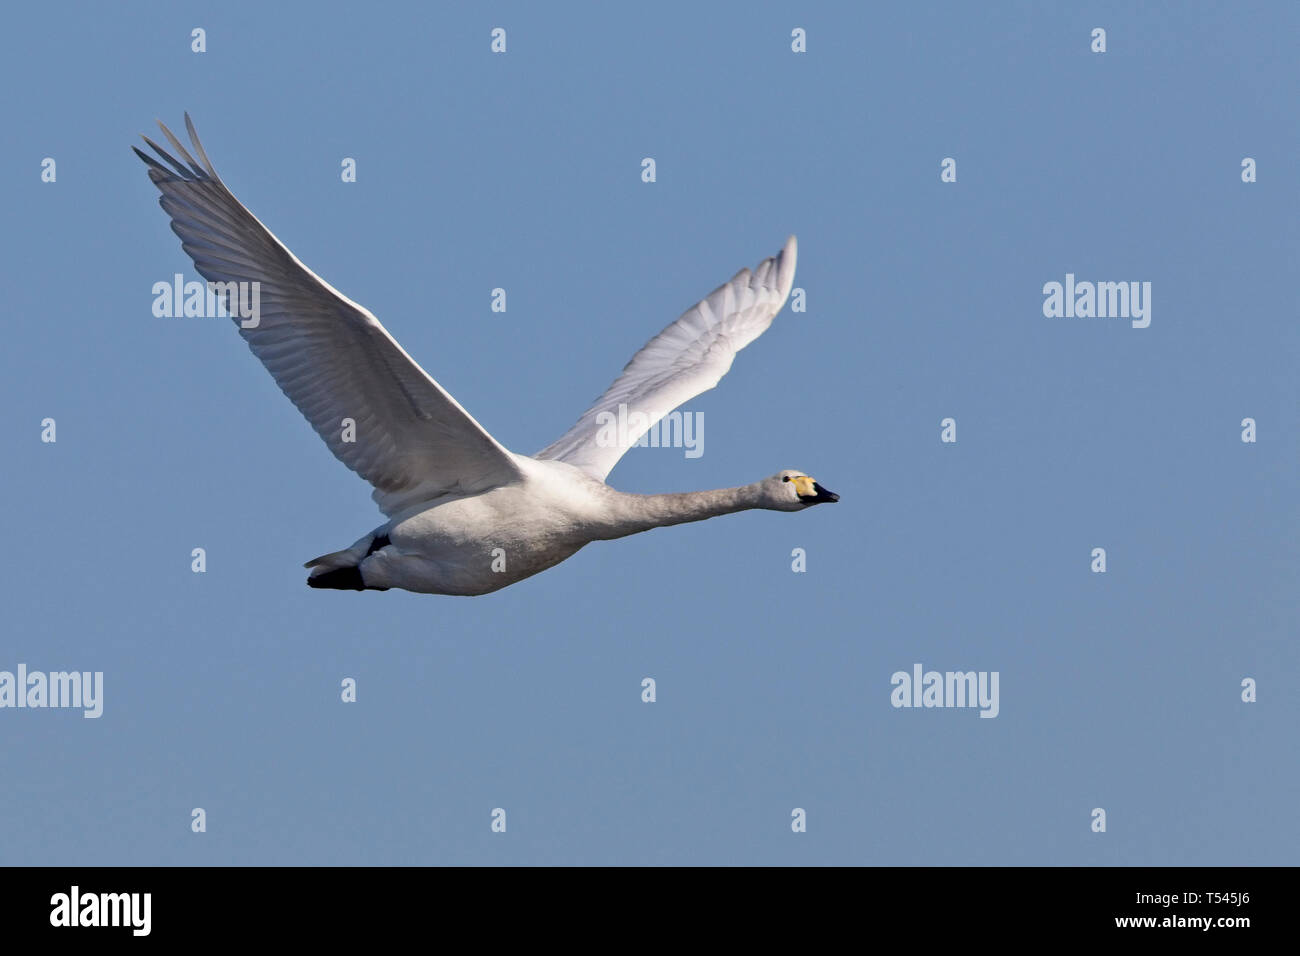 A young Whooper Swan, adult in flight, Welney Wetland Centre, Norfolk, England, UK. Stock Photo